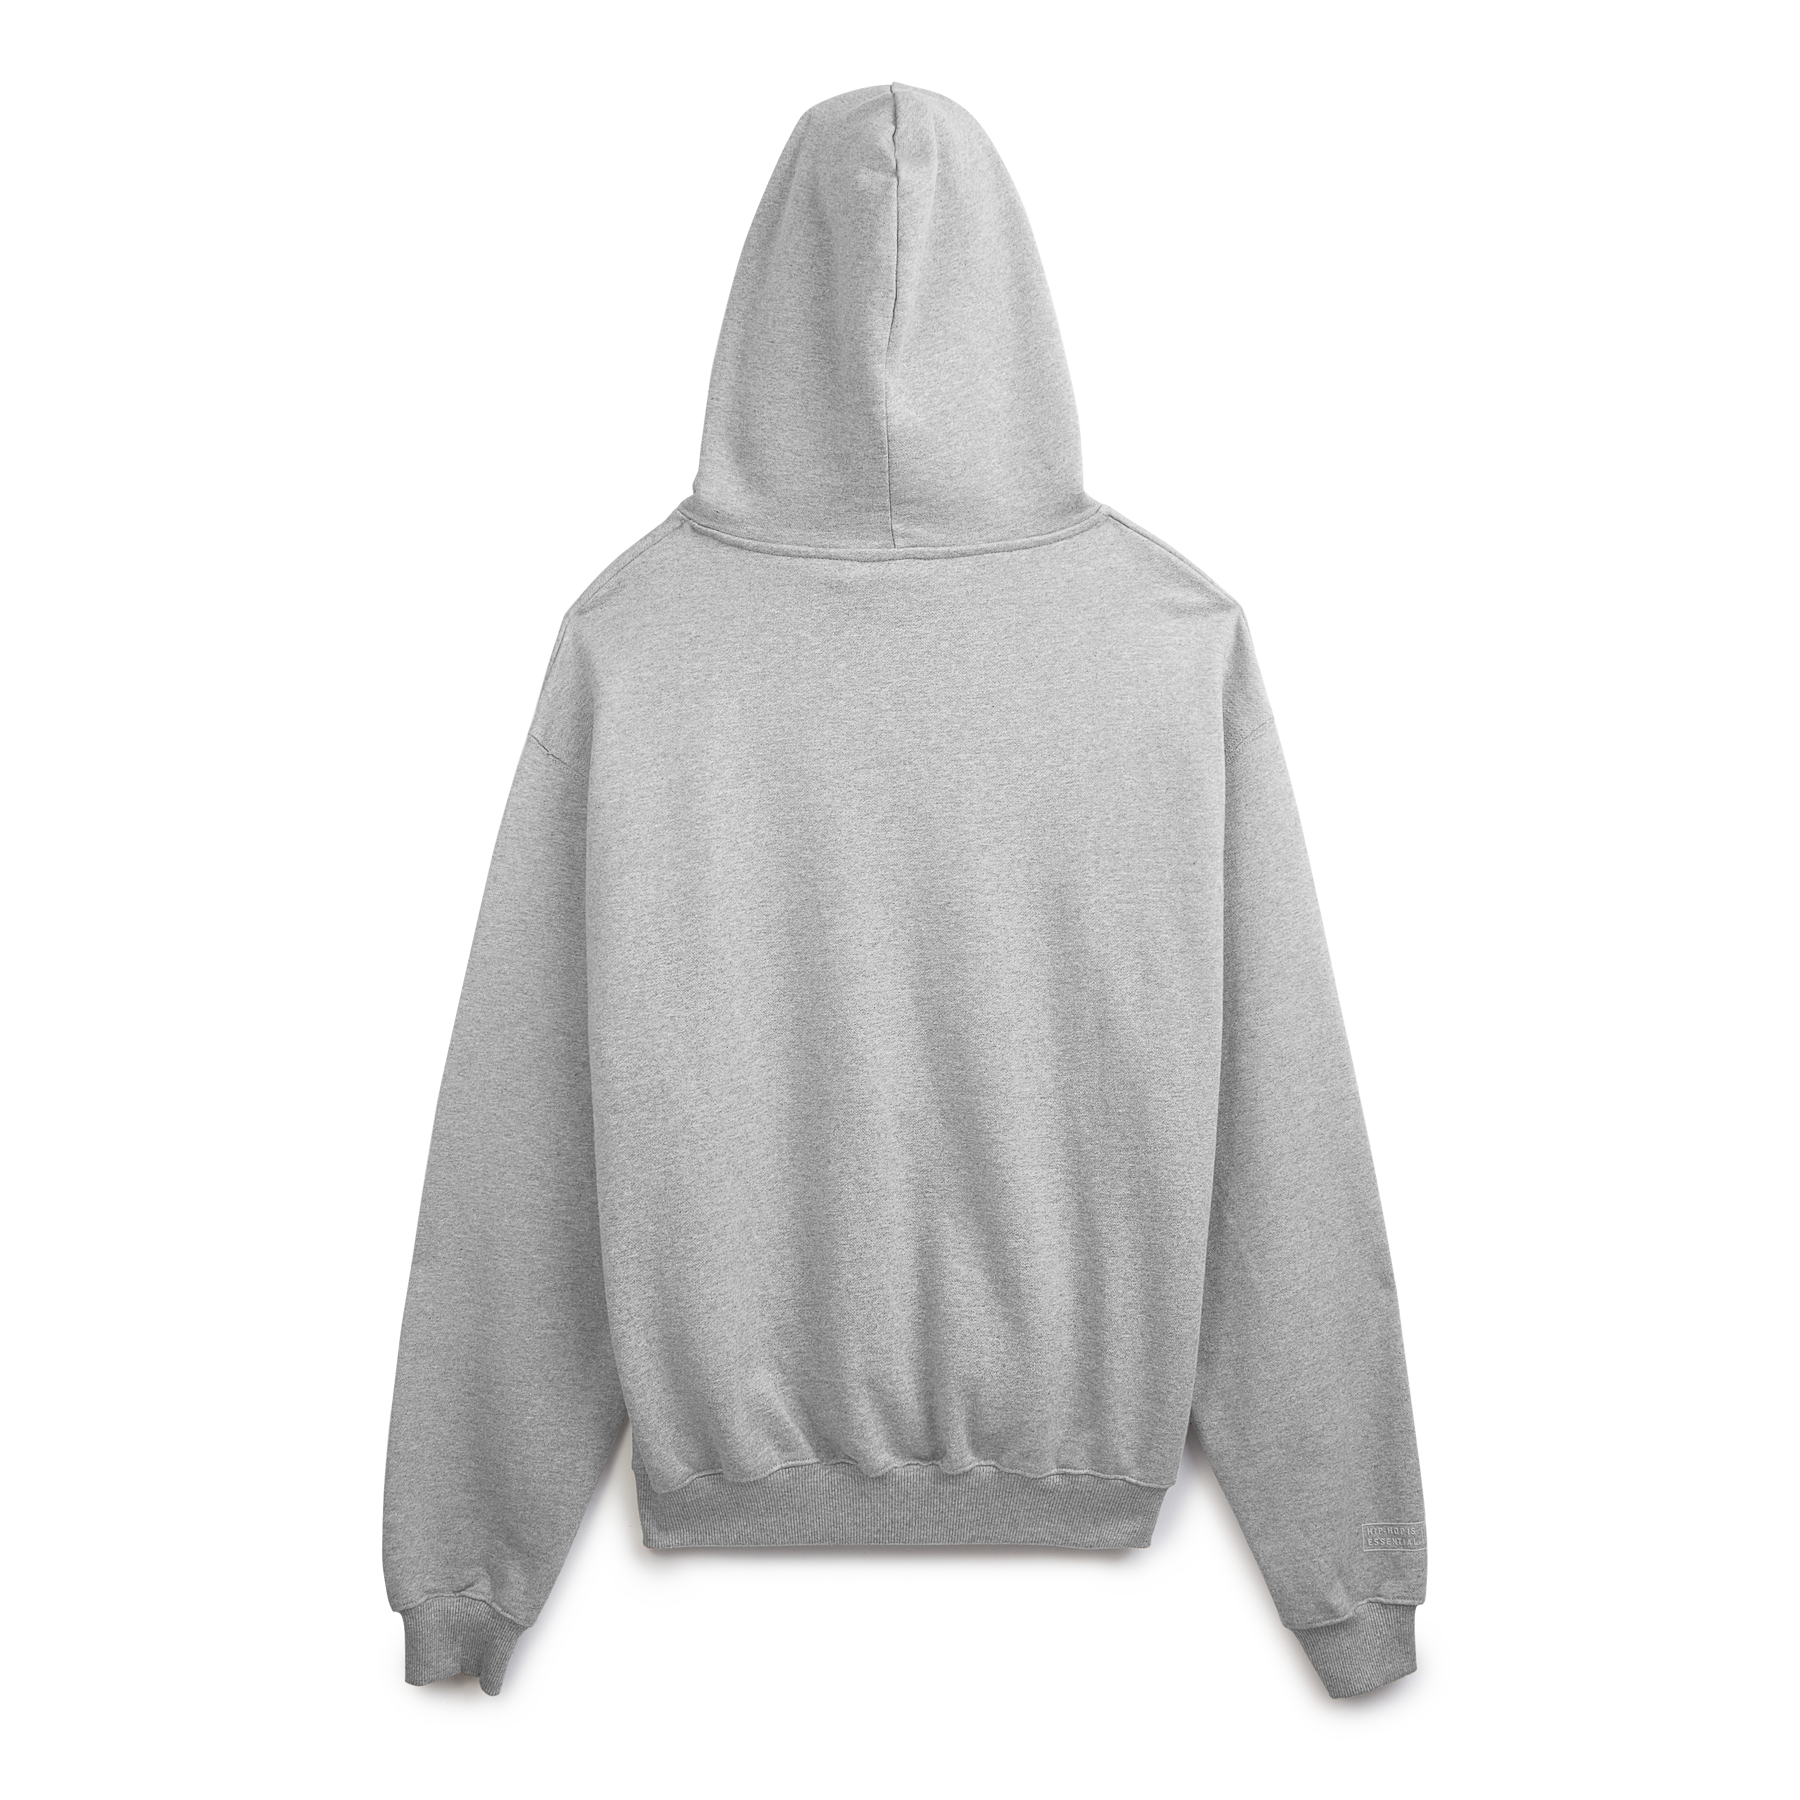 Hip-Hop Is Essential French Terry Hoodie- Heather Grey